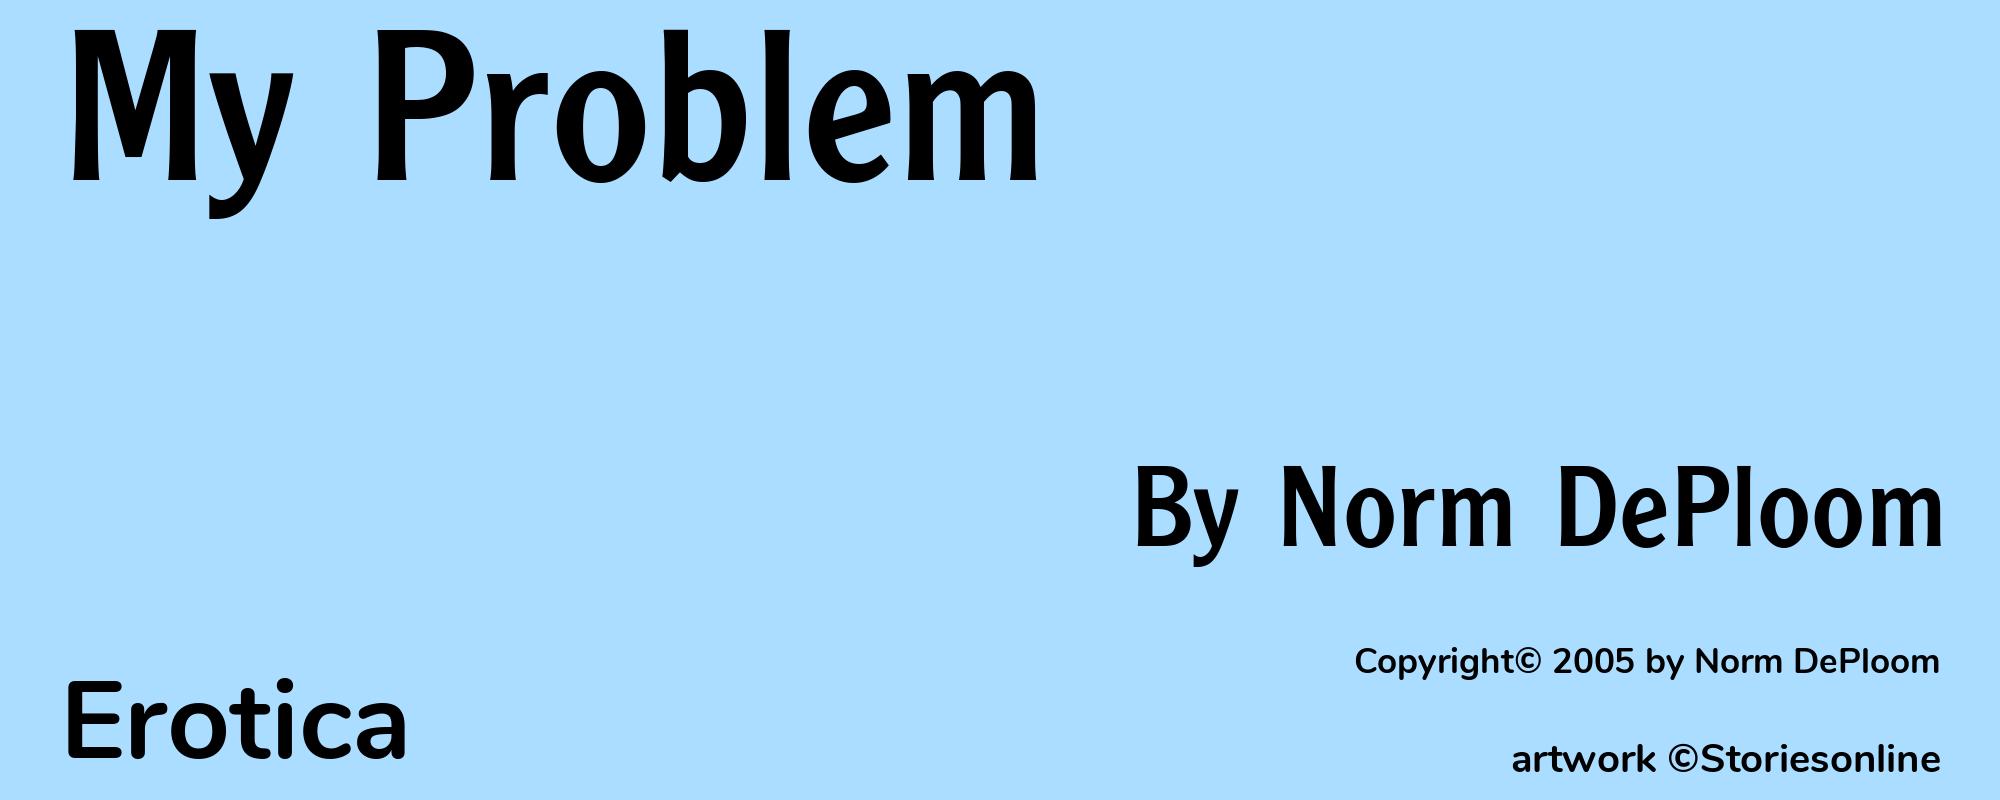 My Problem - Cover